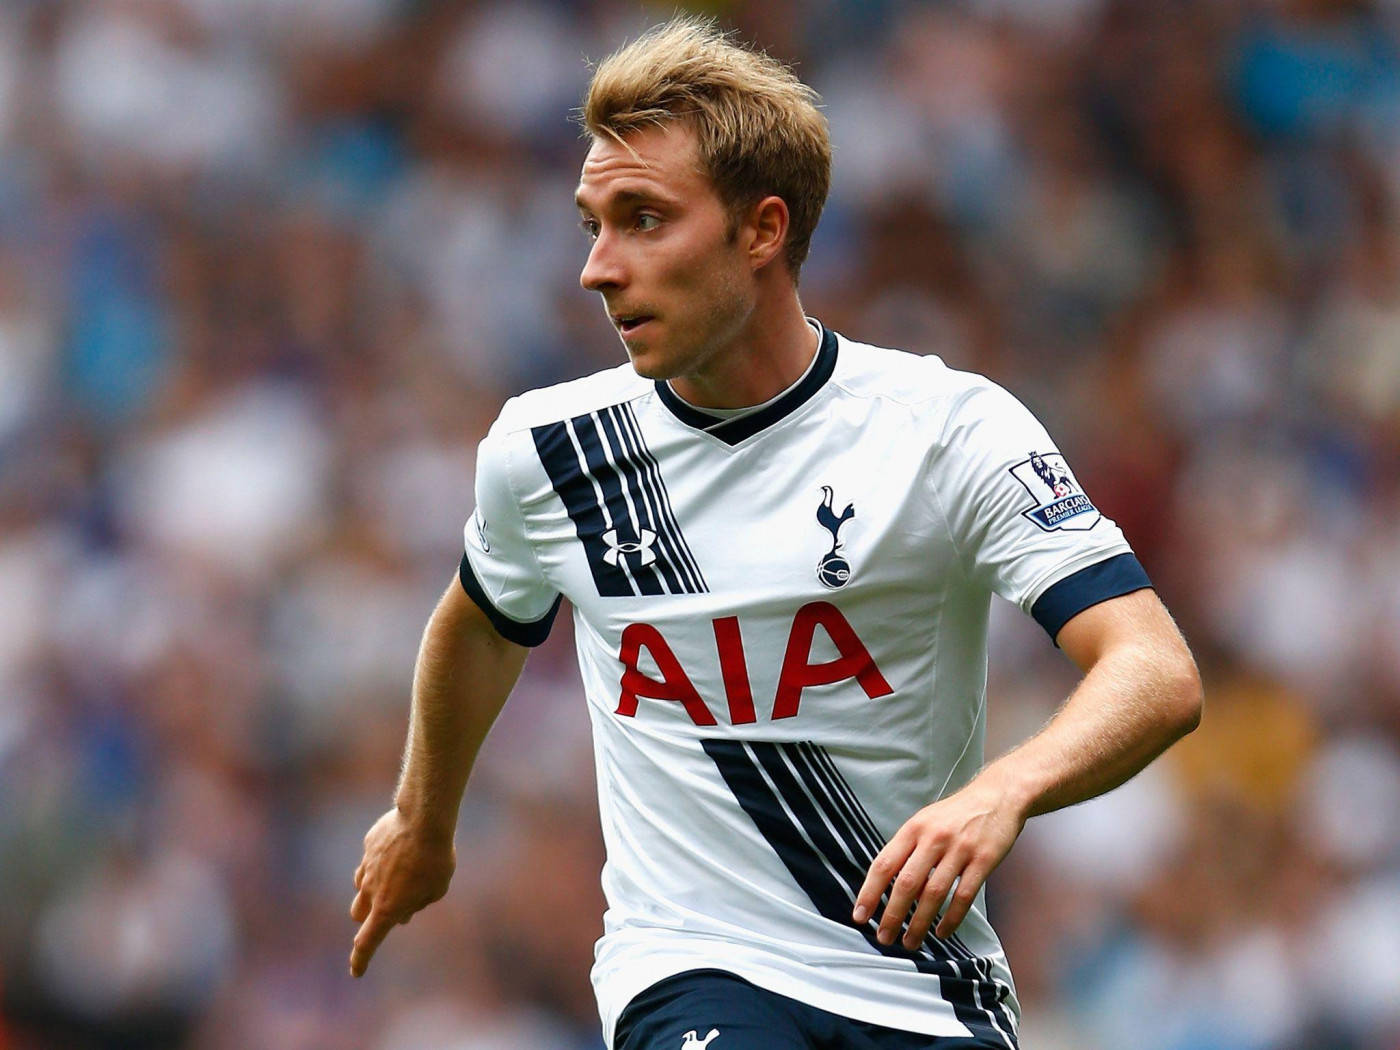 Christian Eriksen With Blurry Crowd In The Backdrop Wallpaper